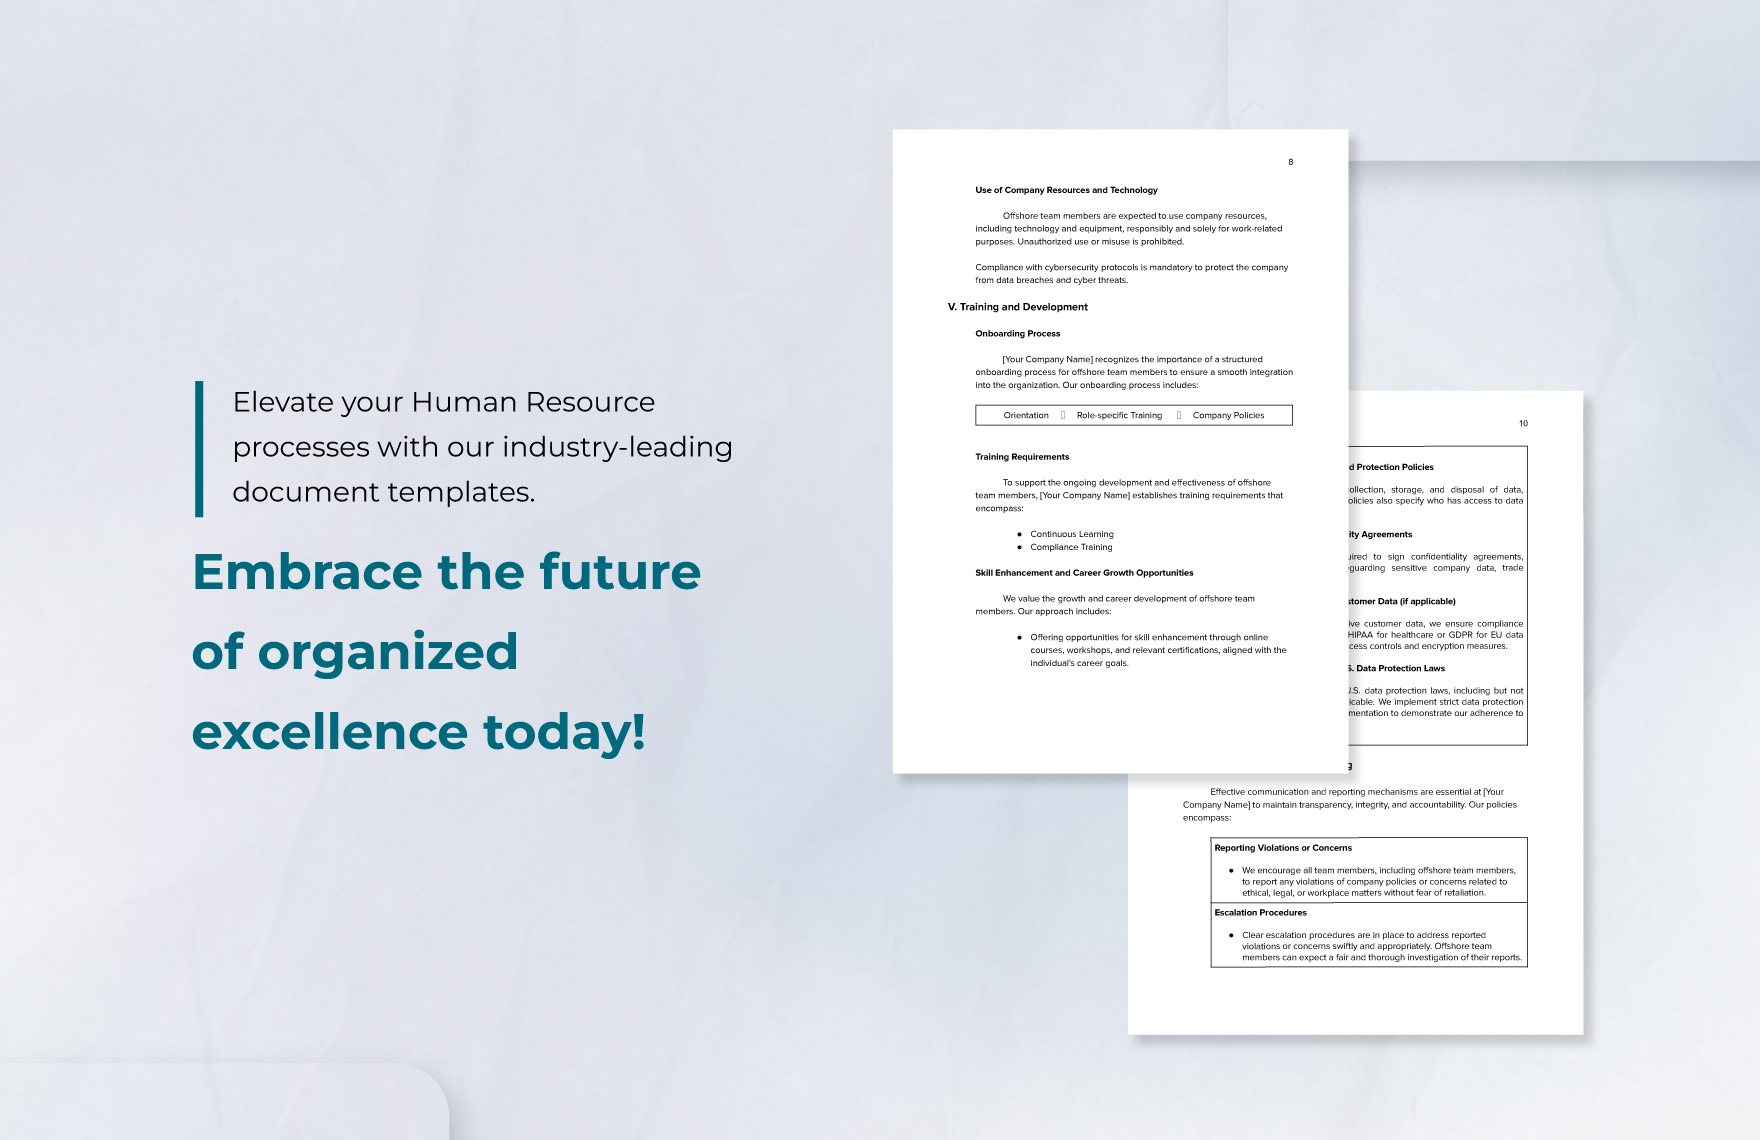 Offshore Team Compliance Document HR Template